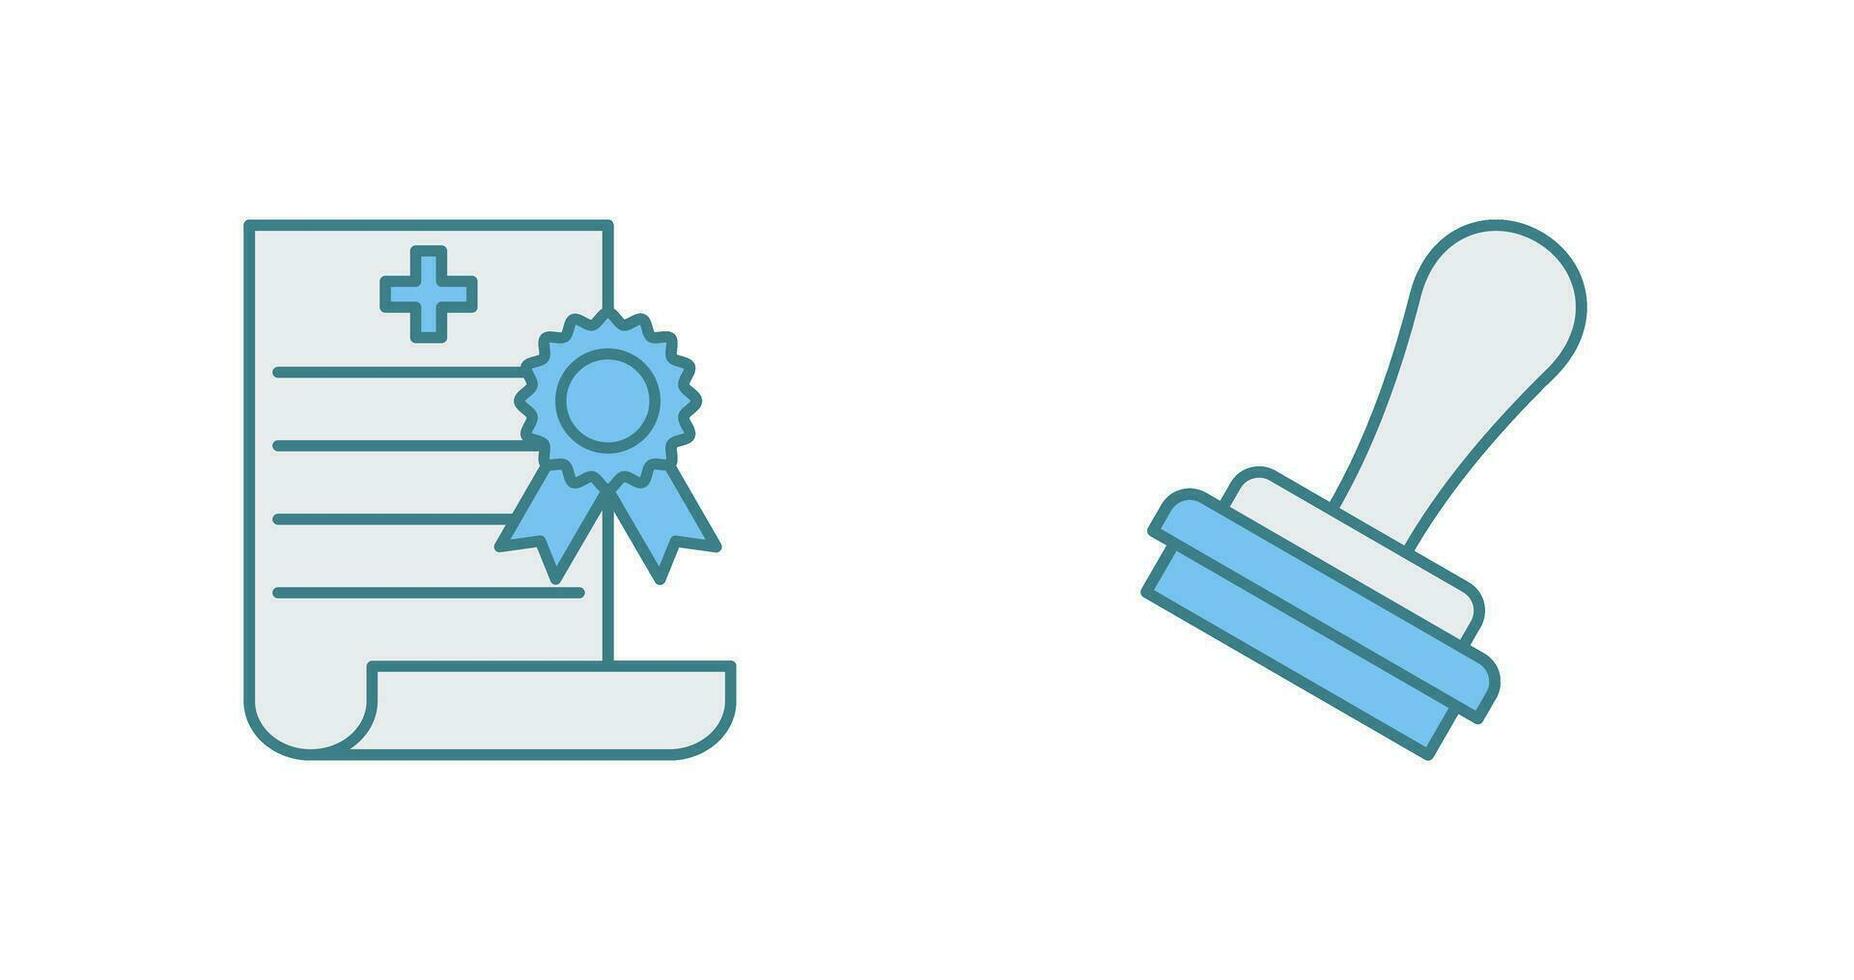 Death Certificate and Stamp Icon vector